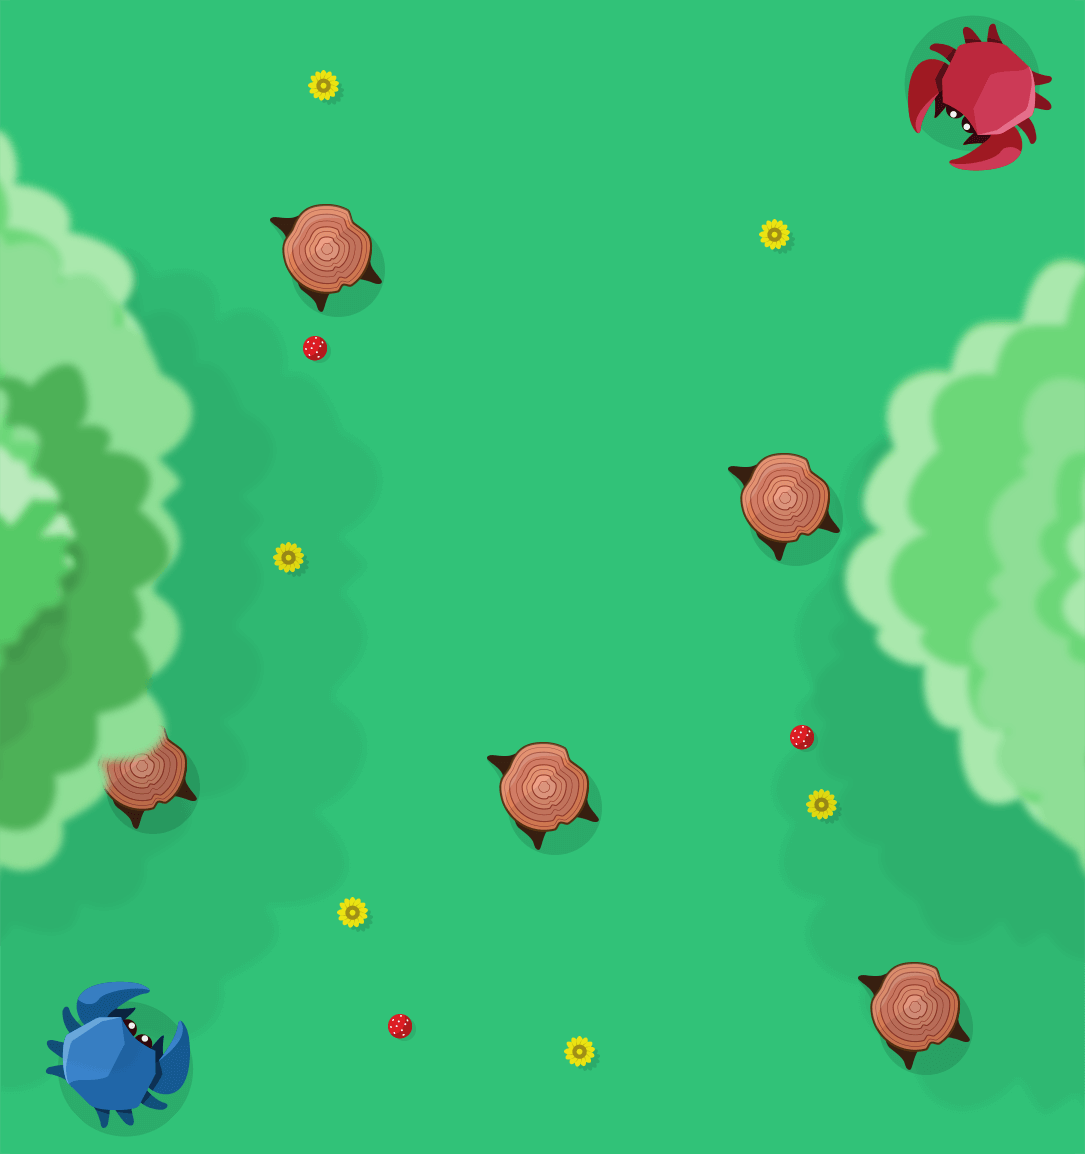 MightyCrabs Map: Weed